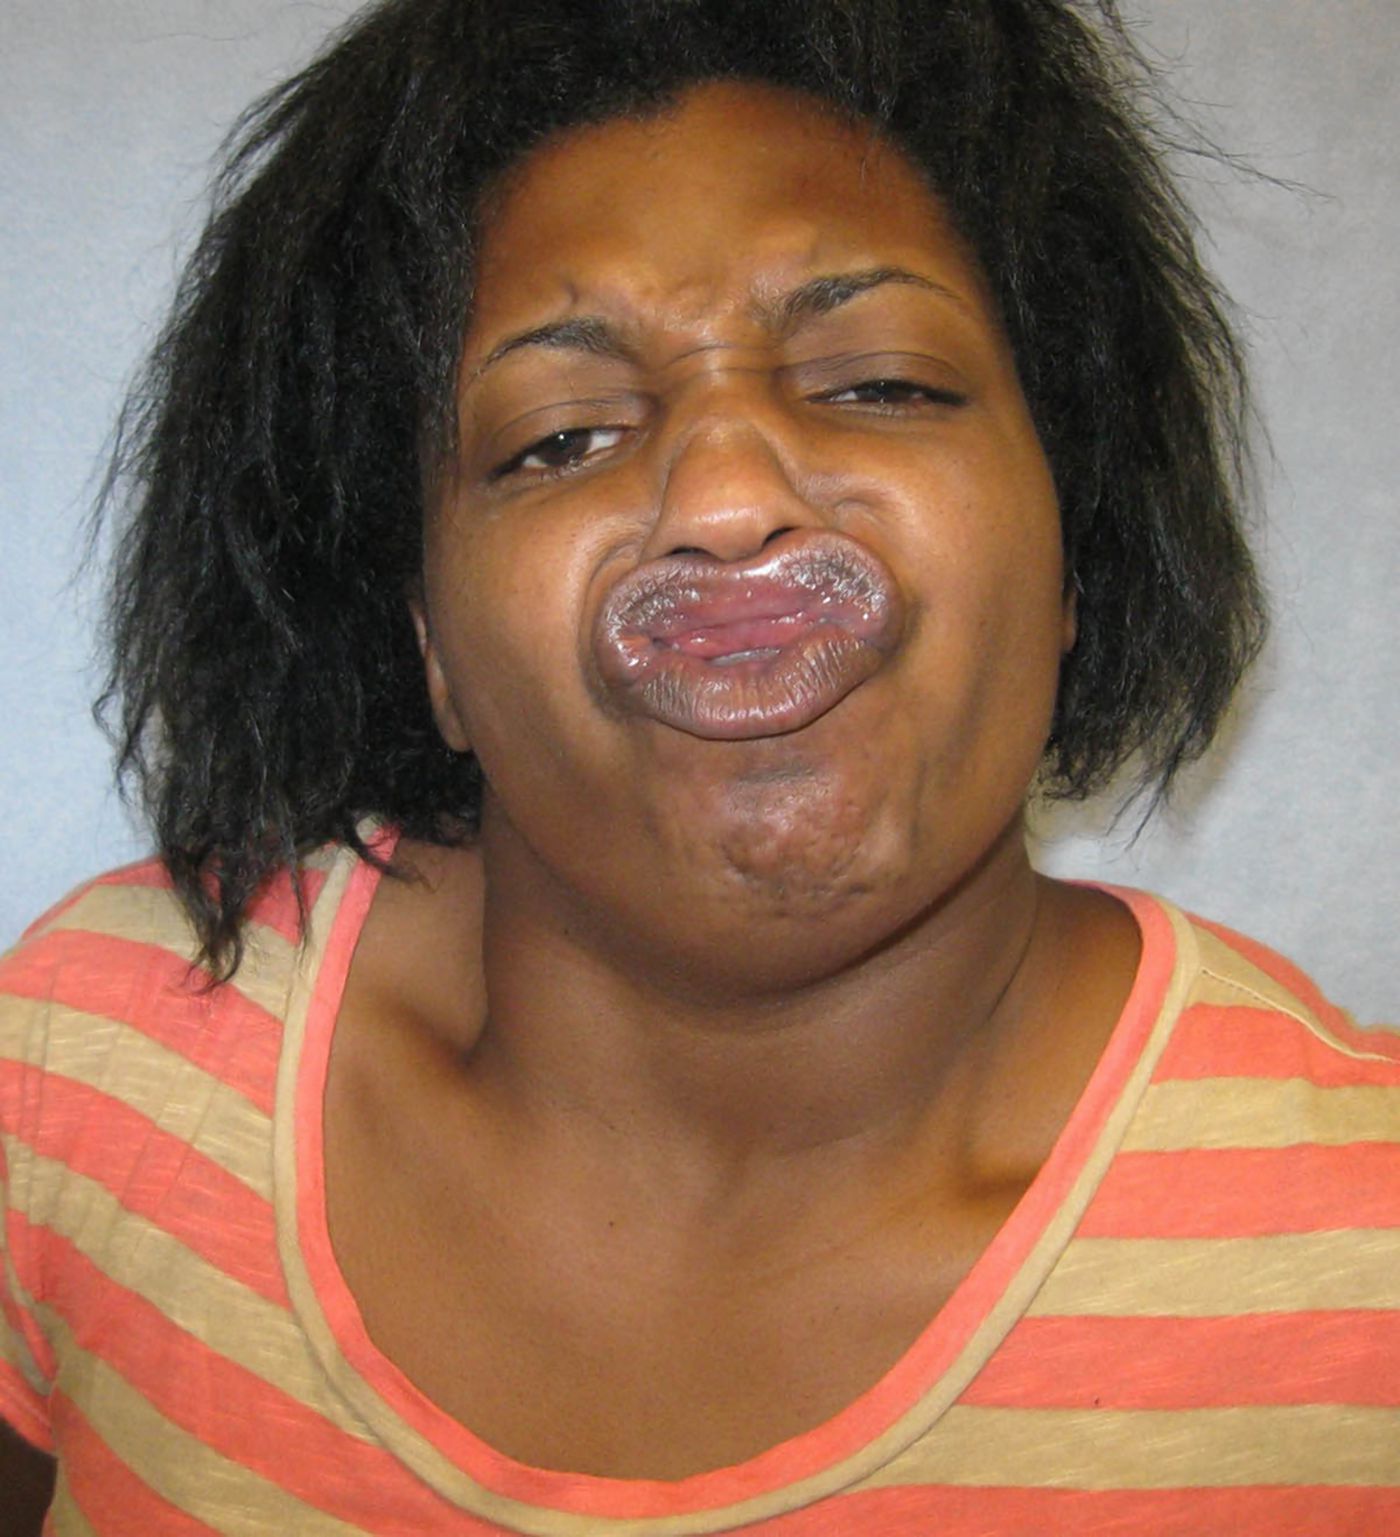 Cleveland woman puckers up for 'duck face' mug shot - NY Daily News